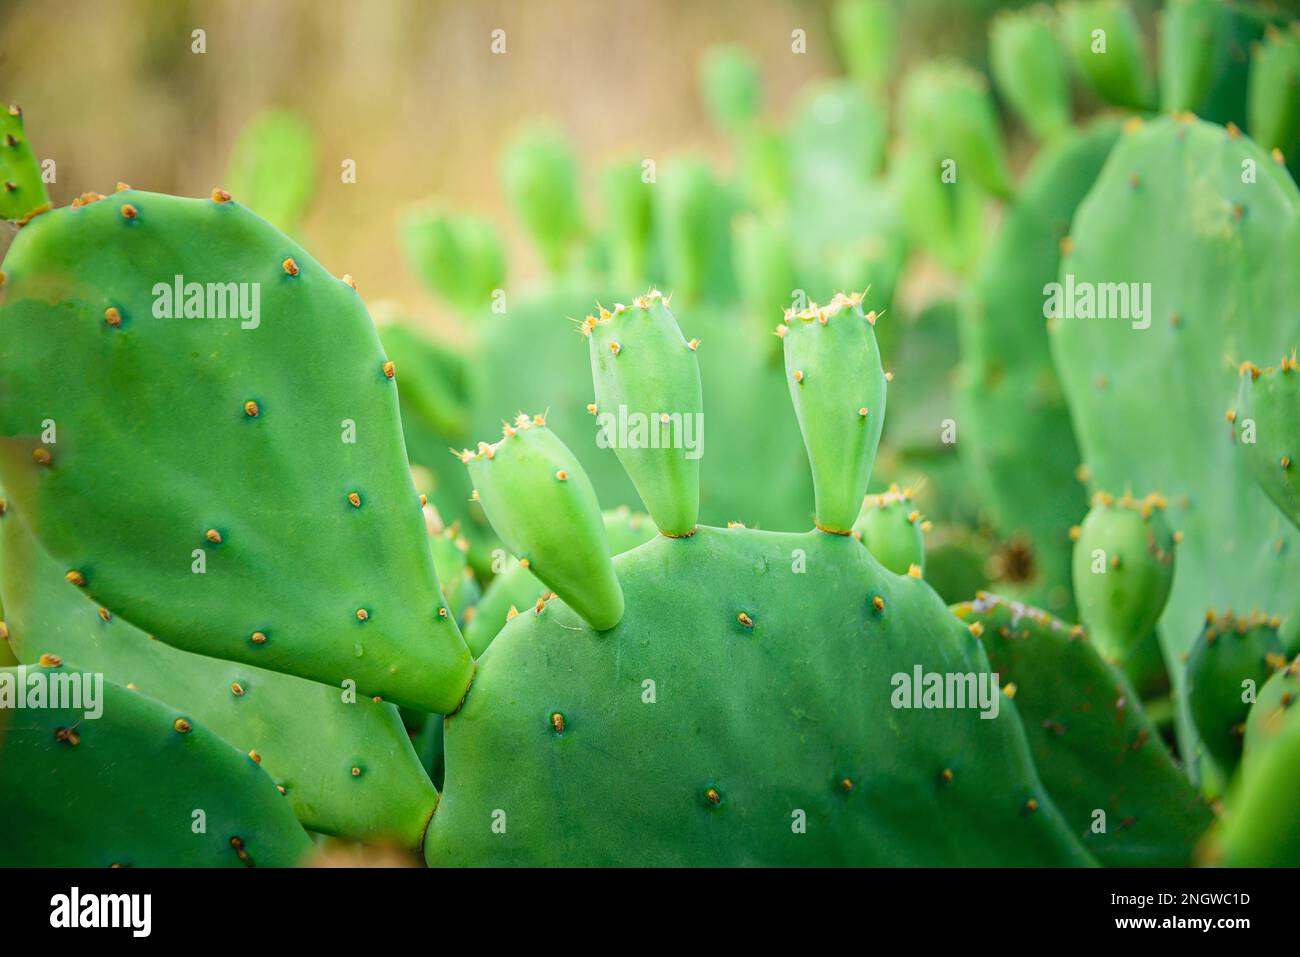 Prickly pear cactus or Indian fig opuntia with purple red fruits. Stock Photo